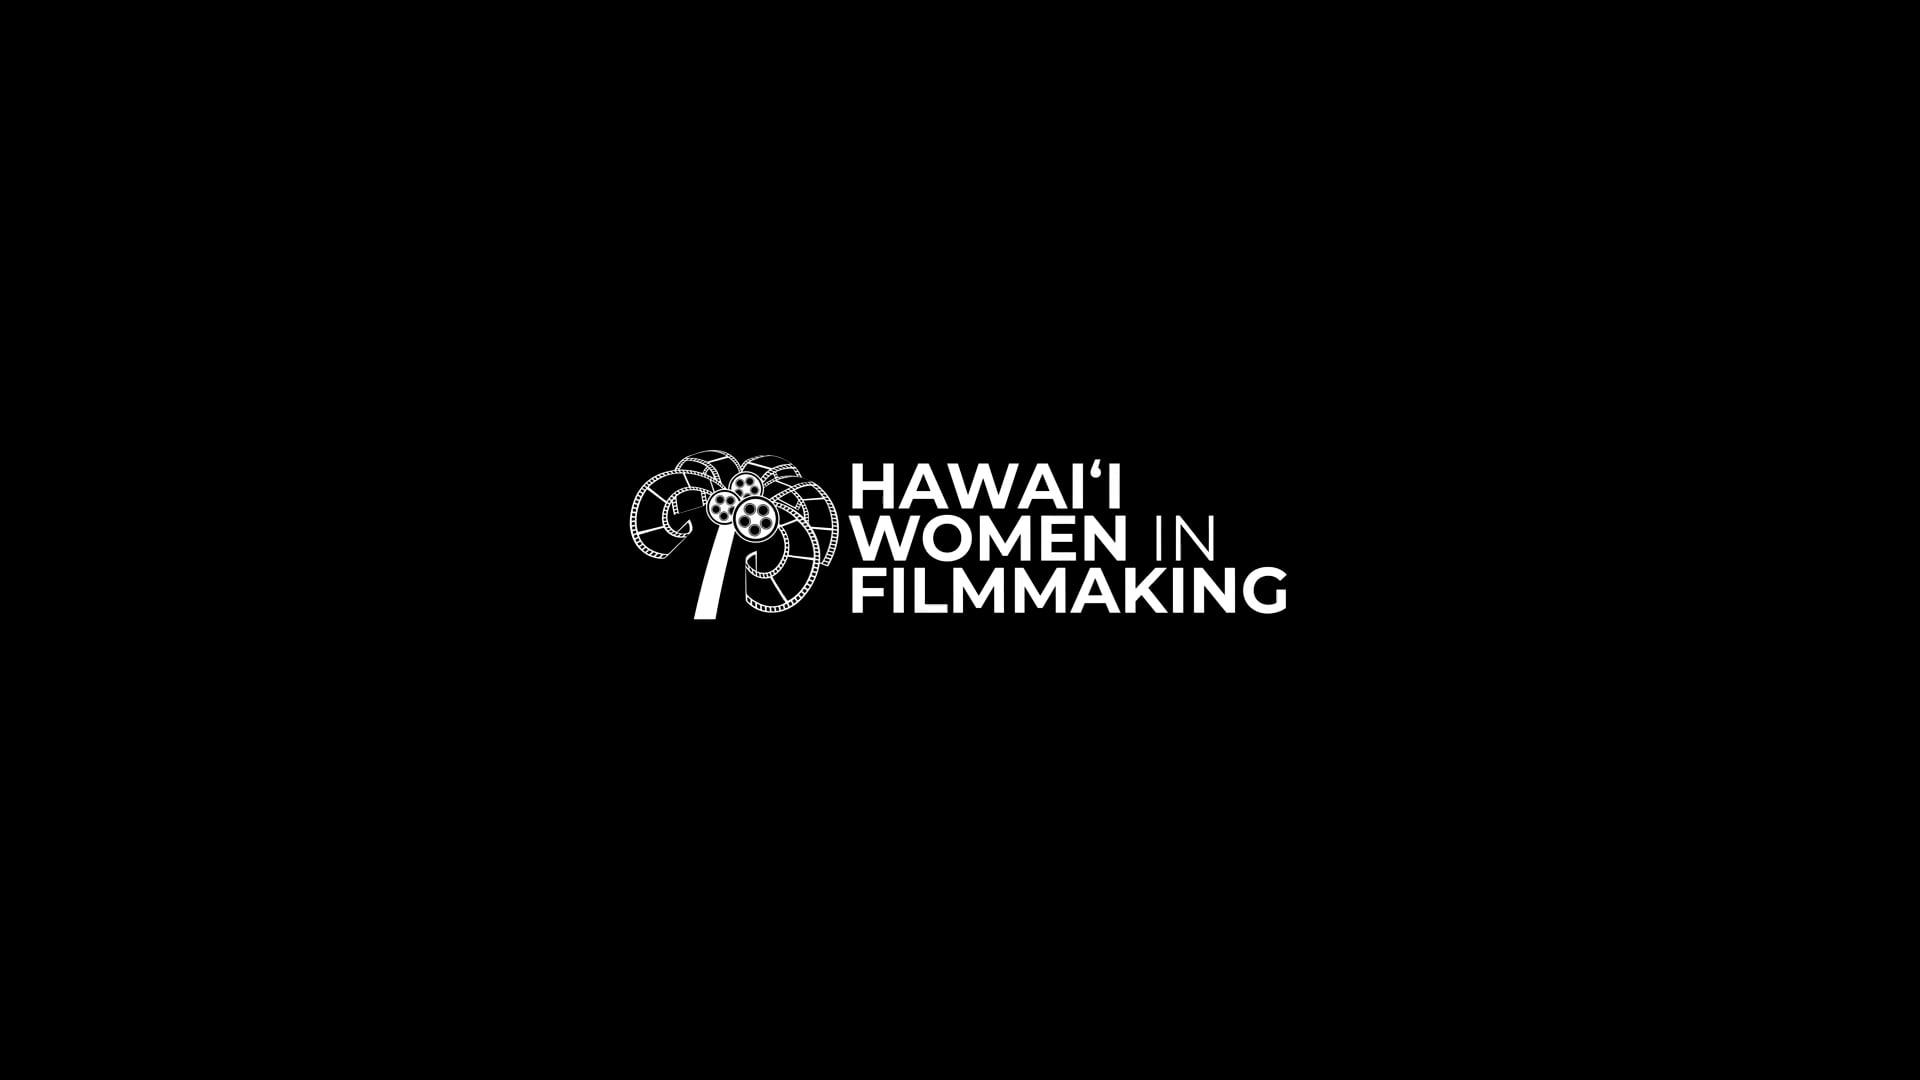 Reel Wāhine of Hawai‘i 3 Official Official Social Trailer